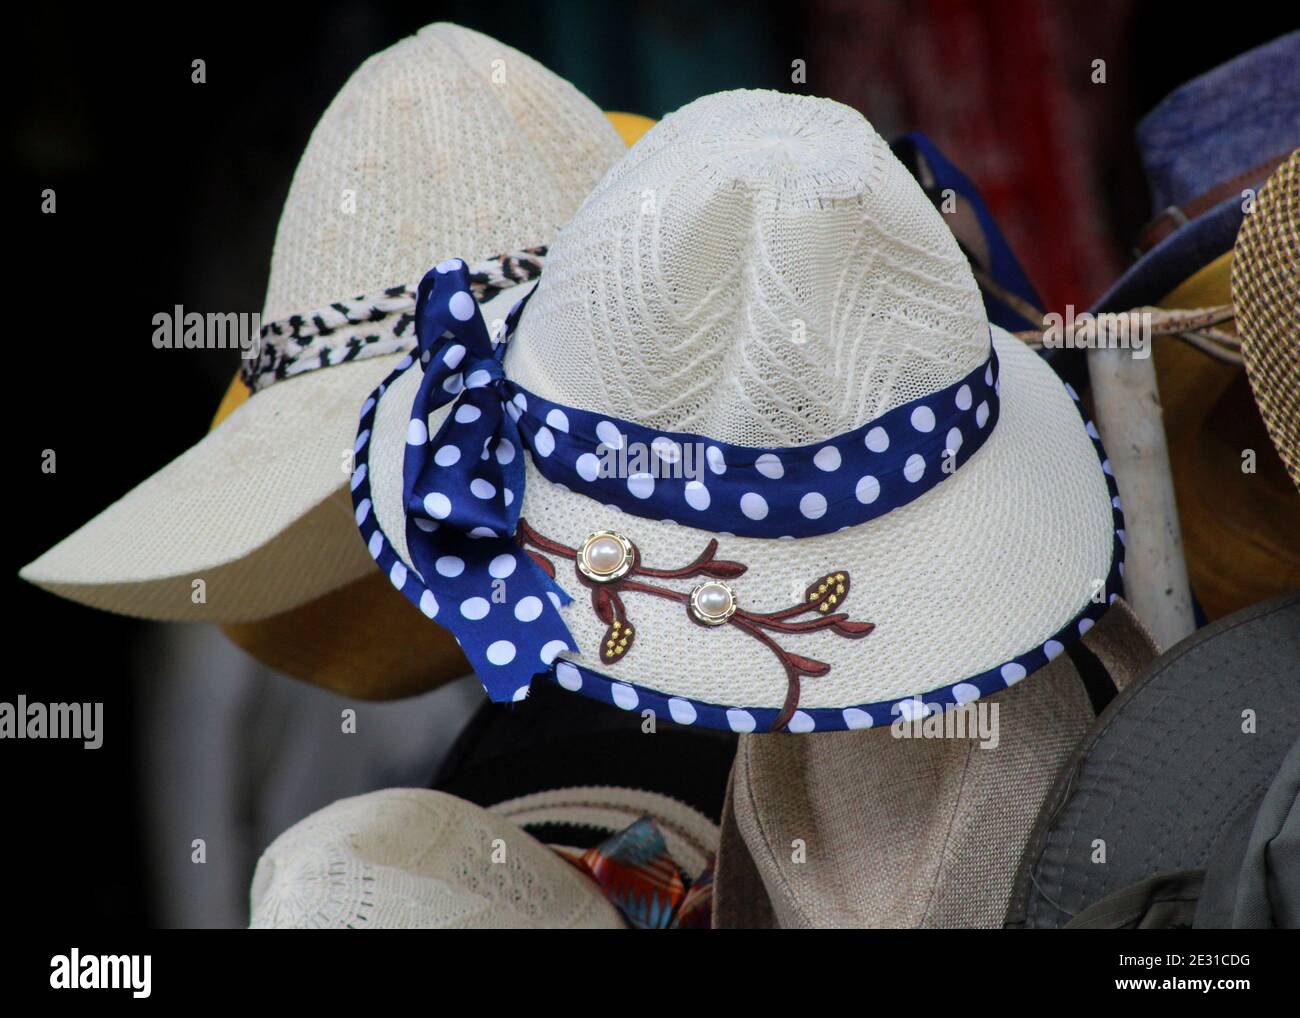 beautiful fashionable female, ladies hat suitable for sun protection or as a fashion accessory Stock Photo